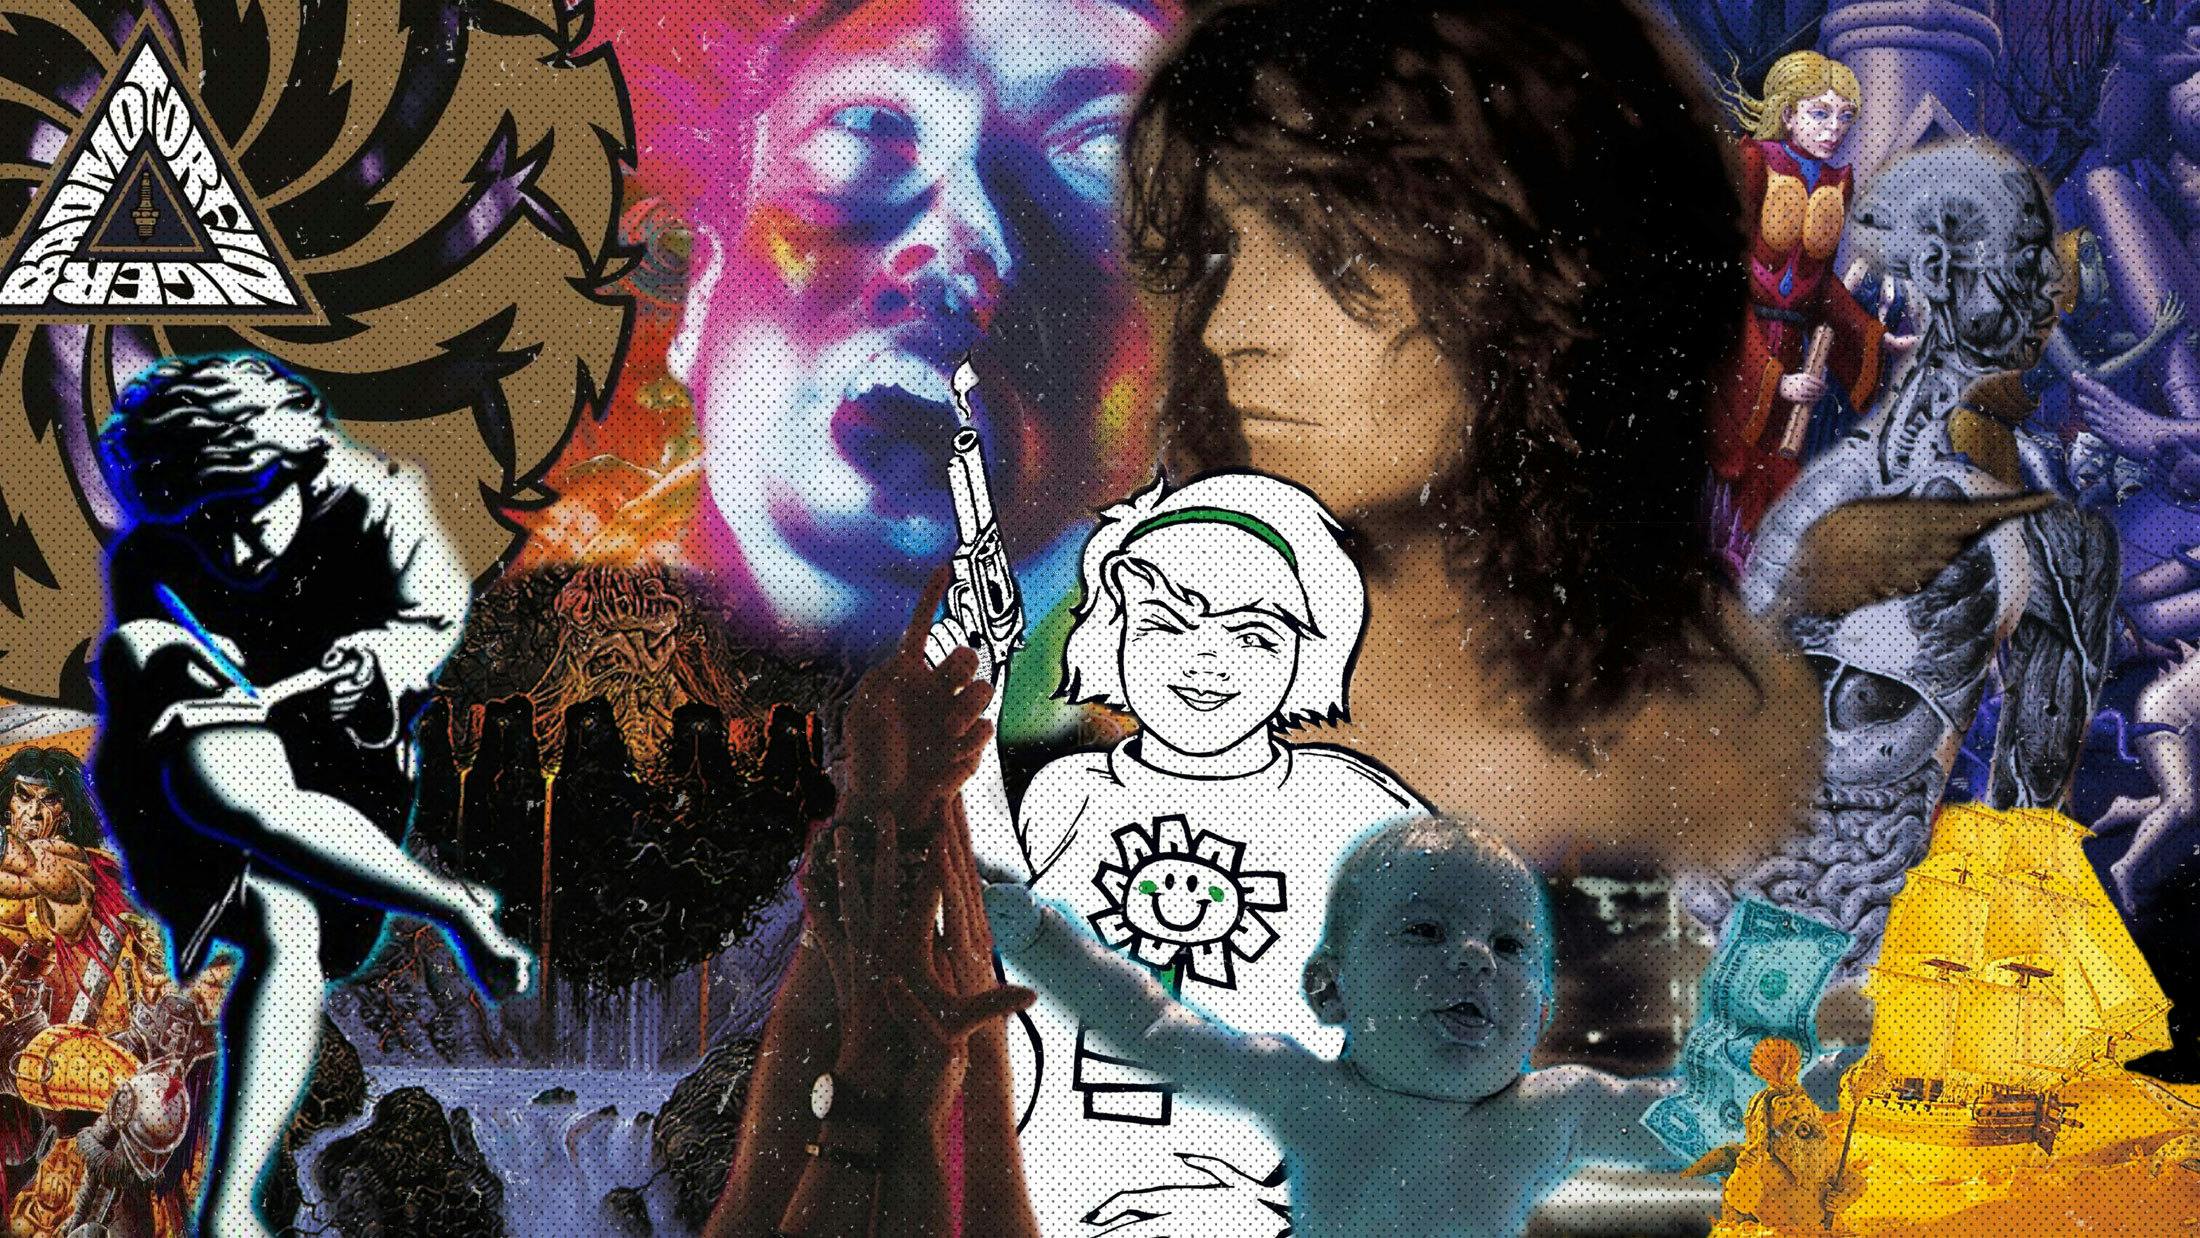 20 classic albums that are 30 years old in 2021